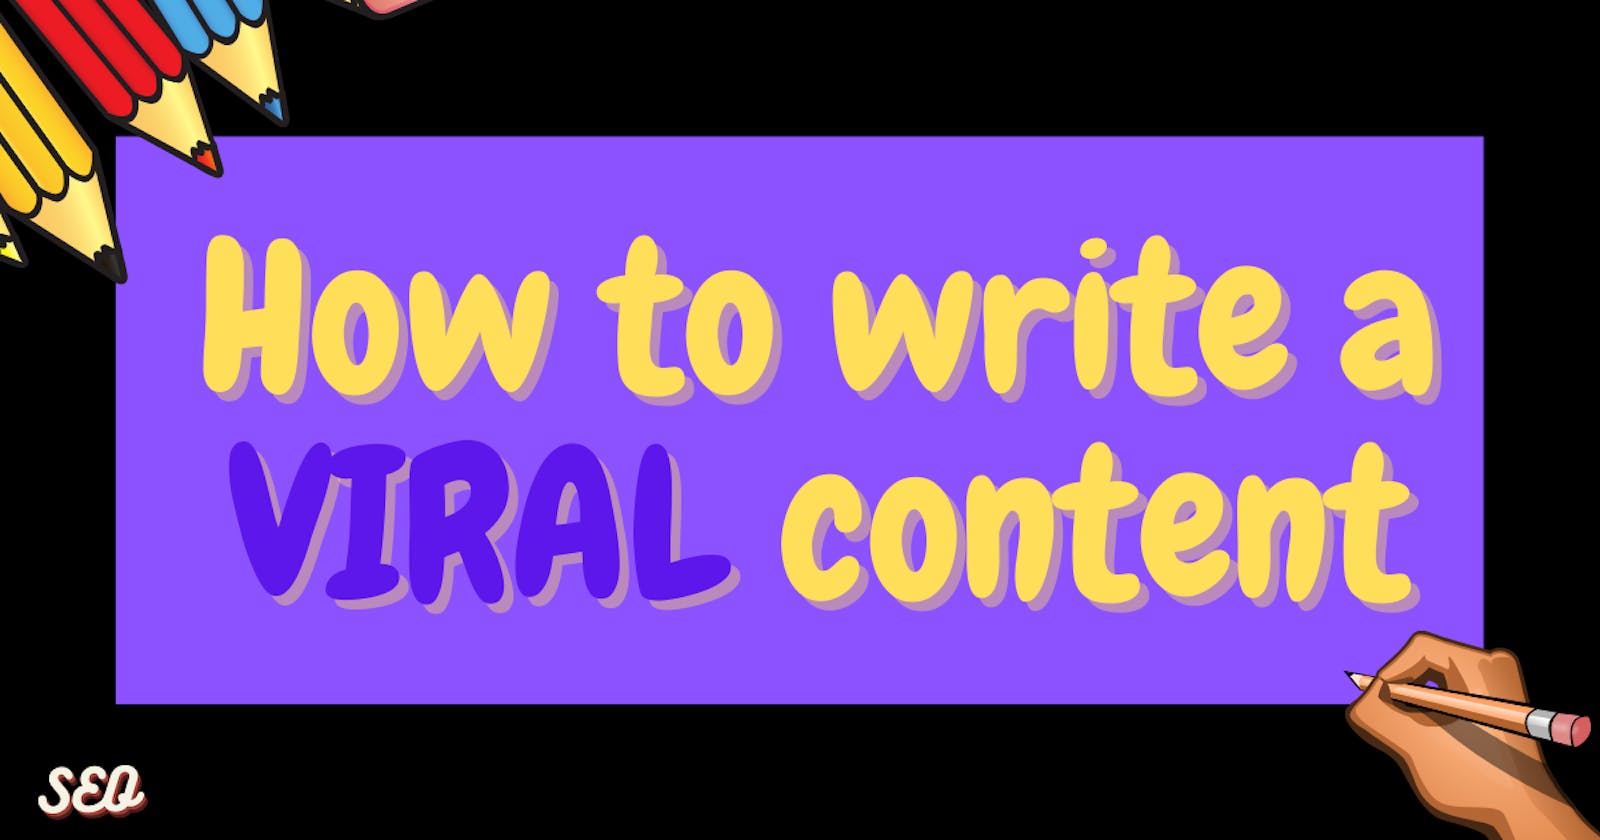 How you can also write a VIRAL content